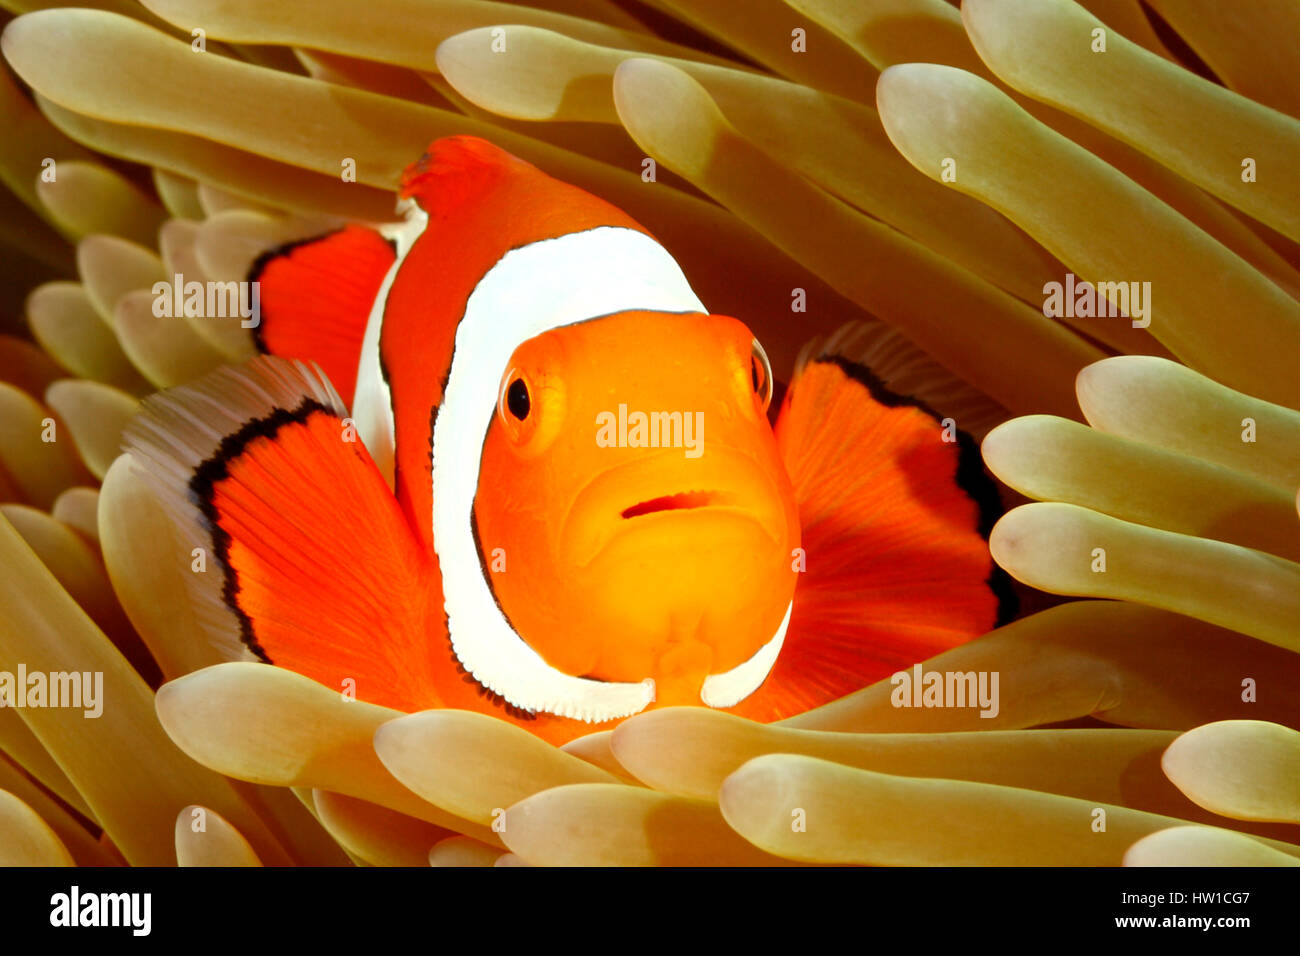 Clown Anemonefish, Amphiprion percula, swimming among the tentacles of its anemone home. Uepi, Solomon Islands Stock Photo